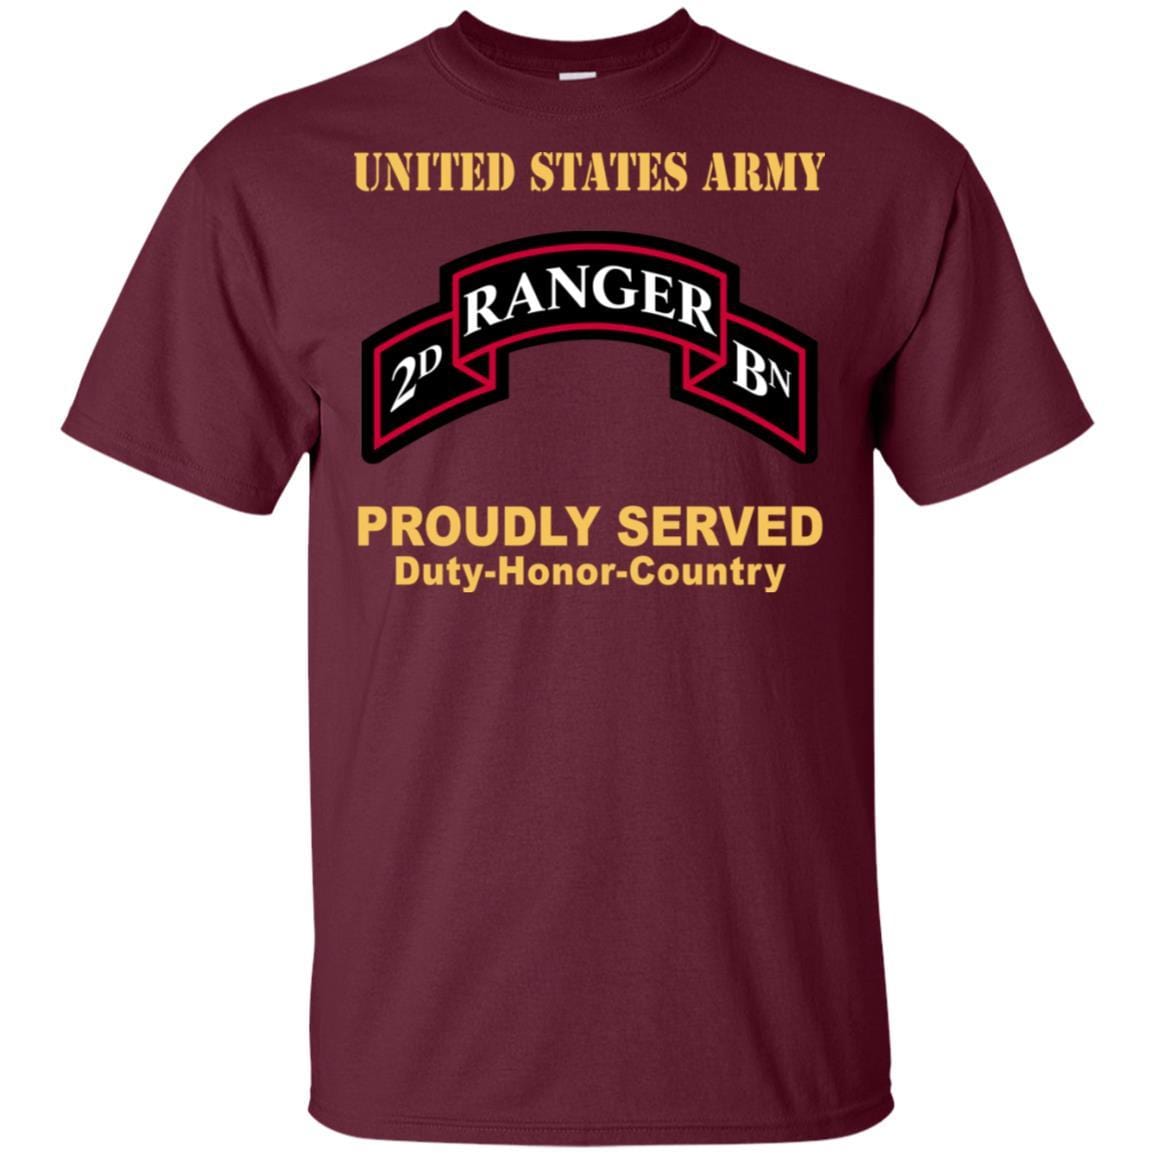 US ARMY 75TH RANGER REGIMENT 2ND BATTALION - Proudly Served T-Shirt On Front For Men-TShirt-Army-Veterans Nation